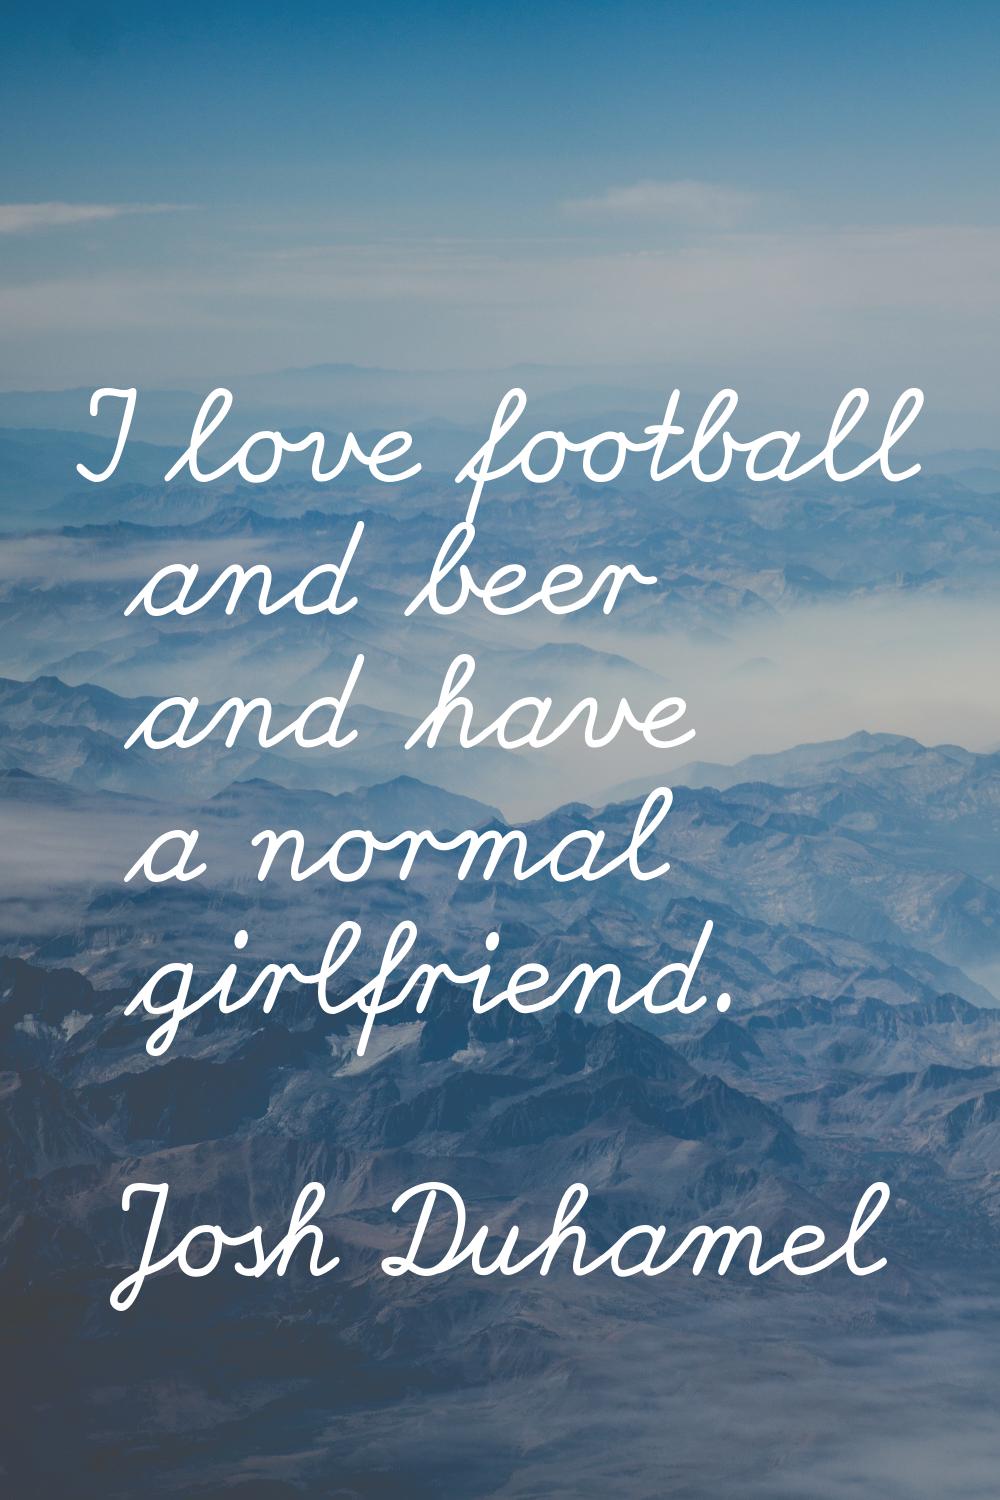 I love football and beer and have a normal girlfriend.